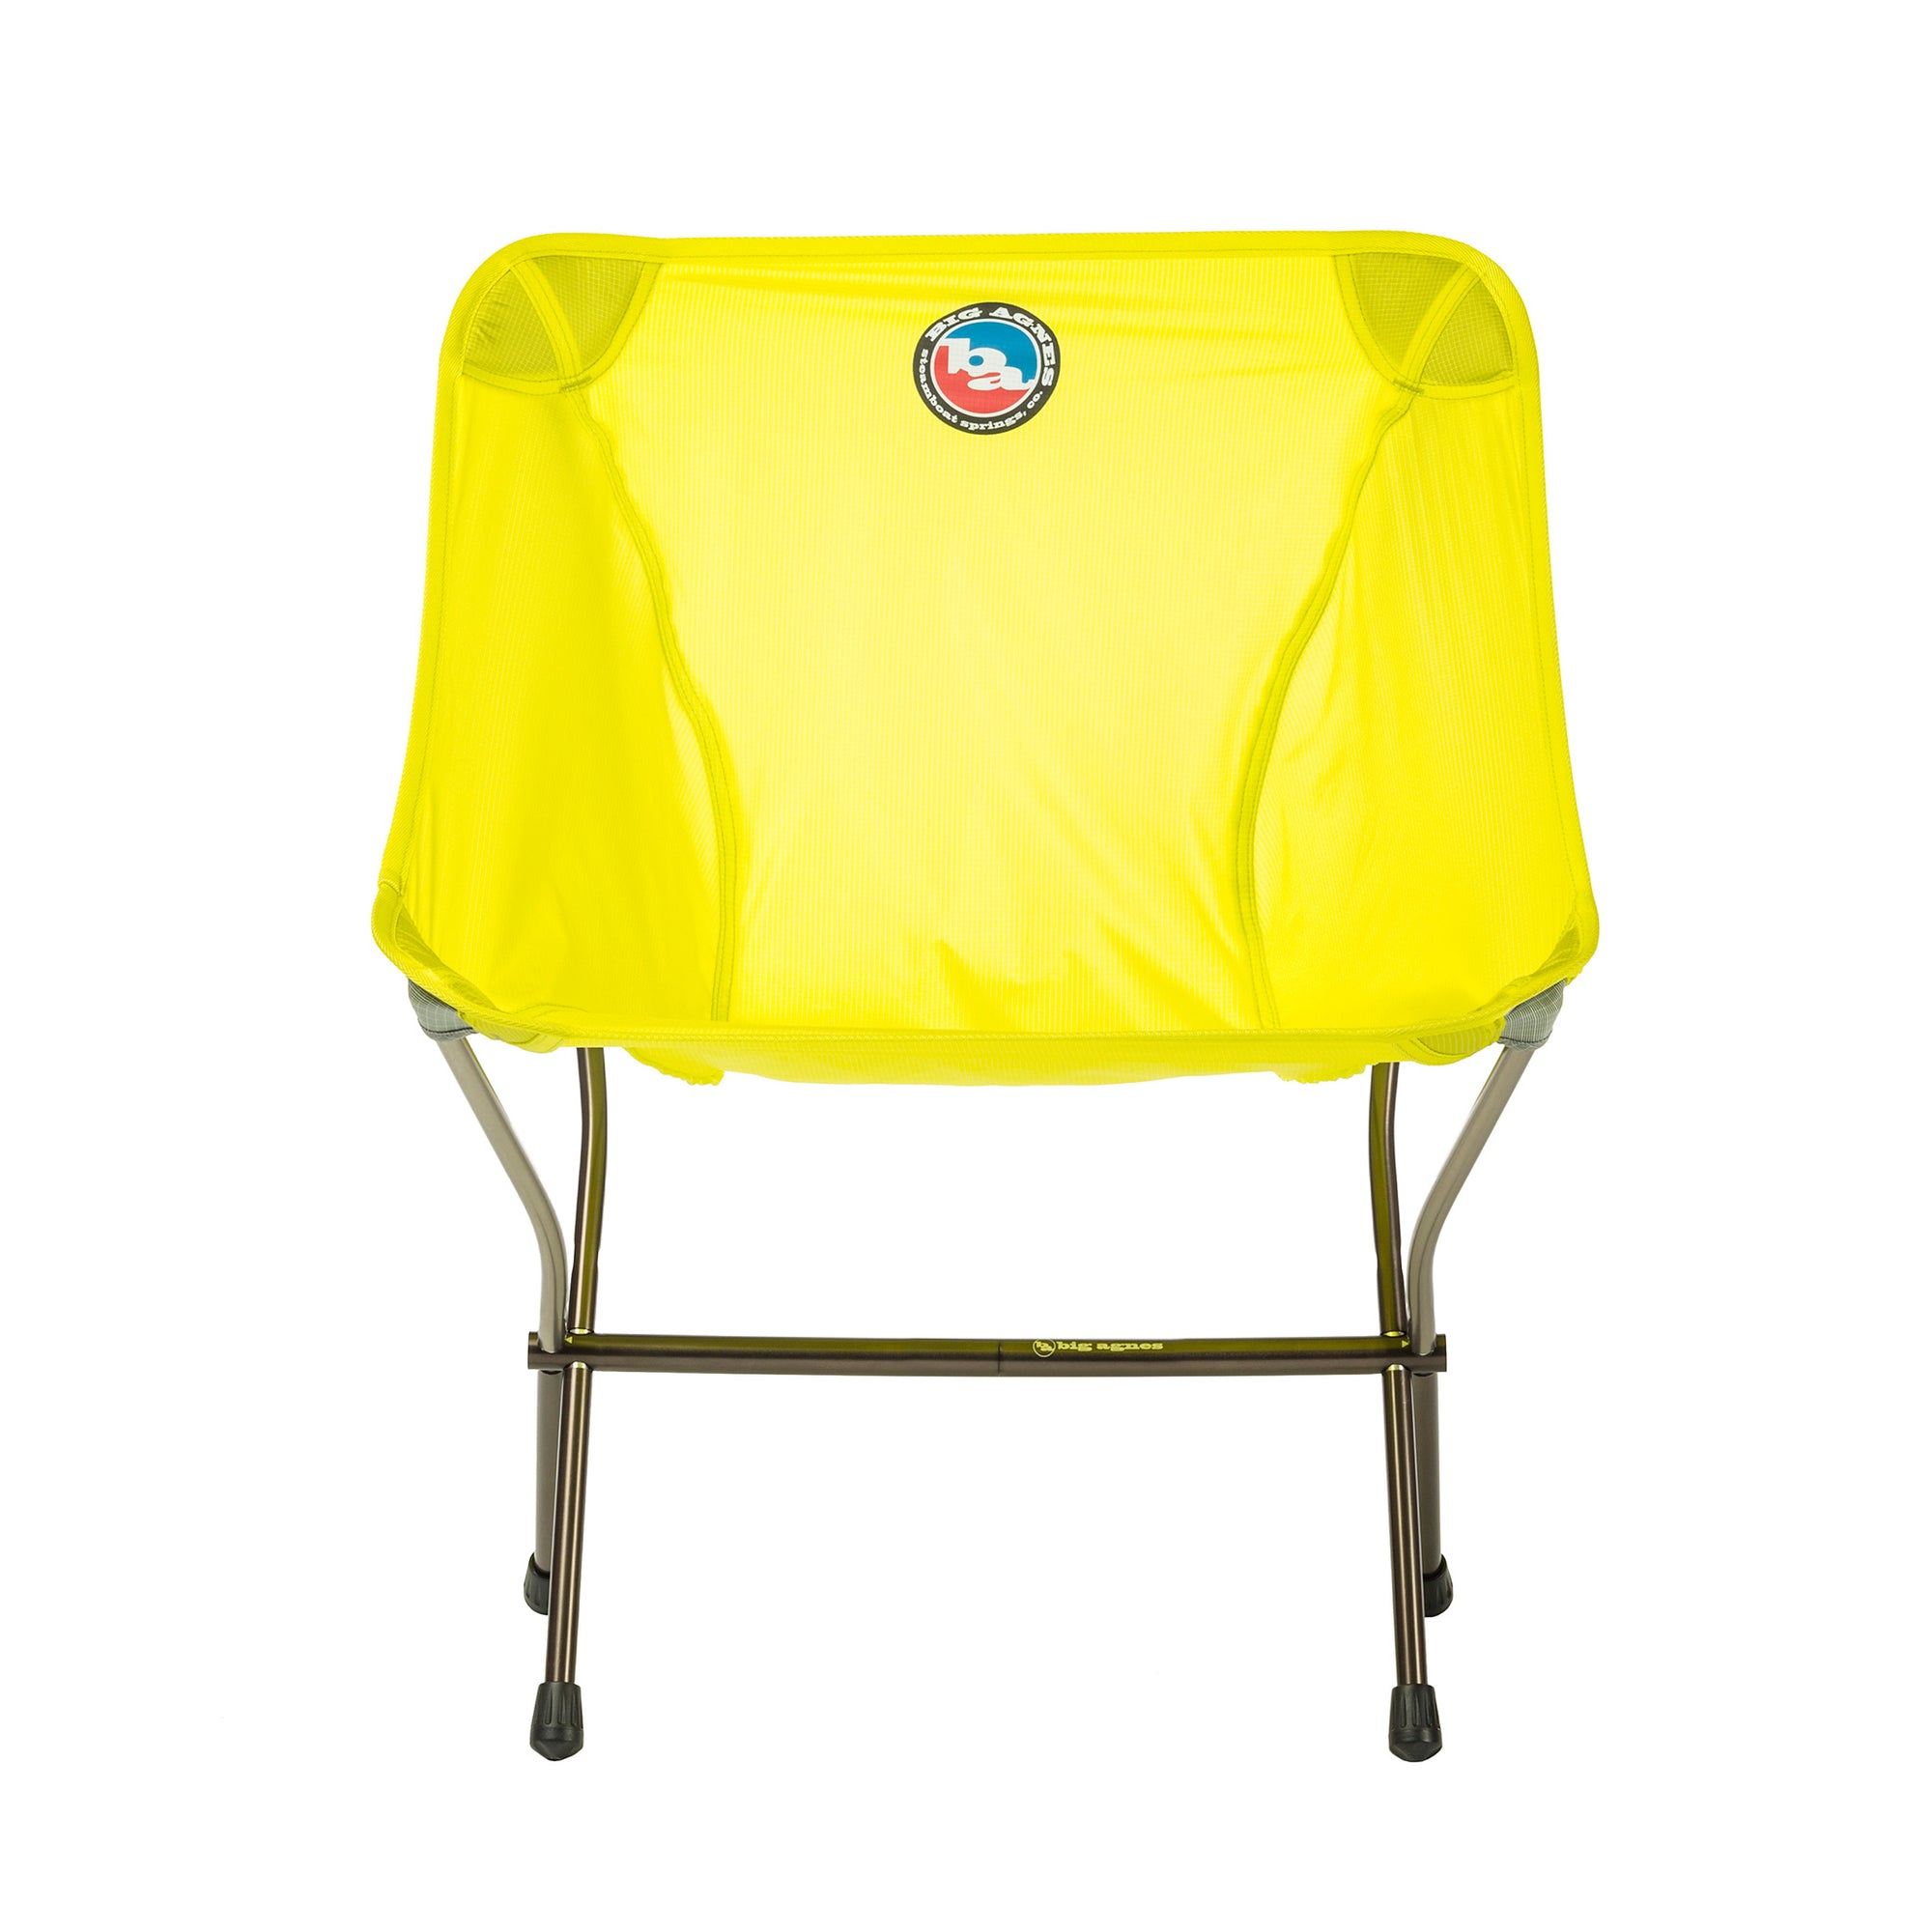 skyline chair front view yellow